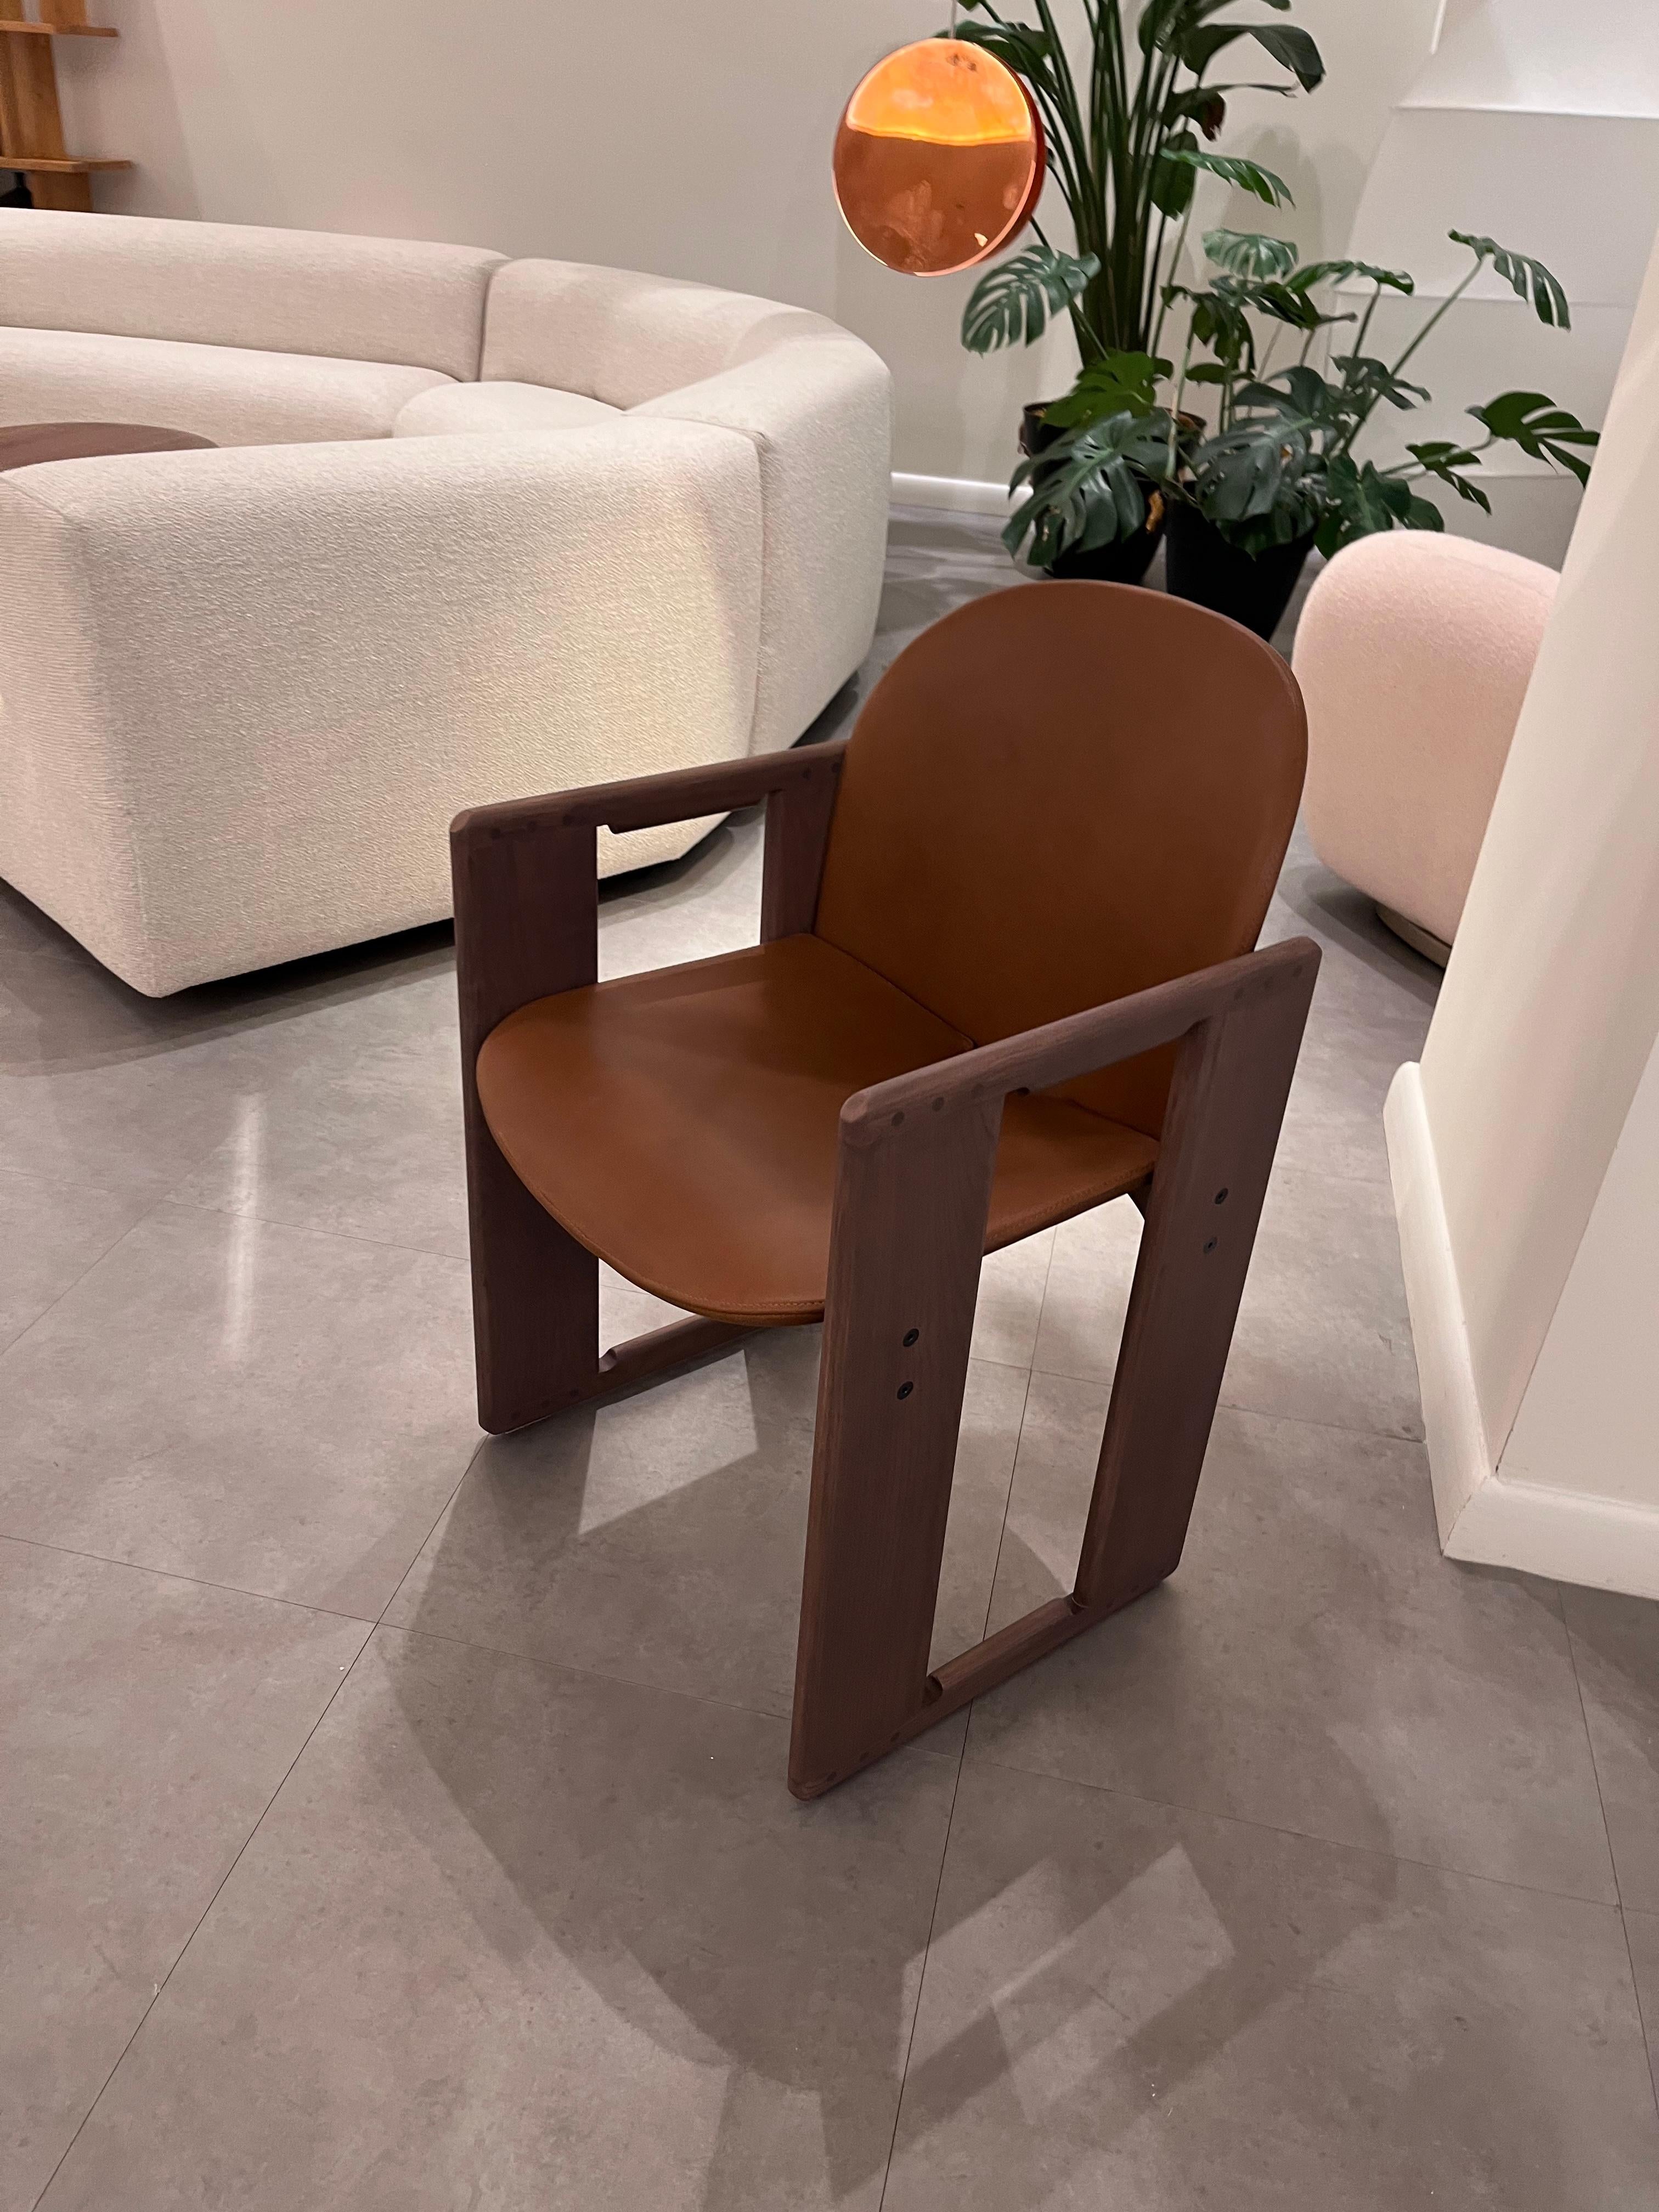 DIALOGO ARMCHAIR 47x51
CAT. Z - PELLE ANILINA 02 WALNUT
STRUCTURE T169 FIRE RETARDANT FOAM
CAL117

A rectangular frame with rounded edges, masterful joints, and strictly visible dowels and screws reinforces the typical double trestle structure by